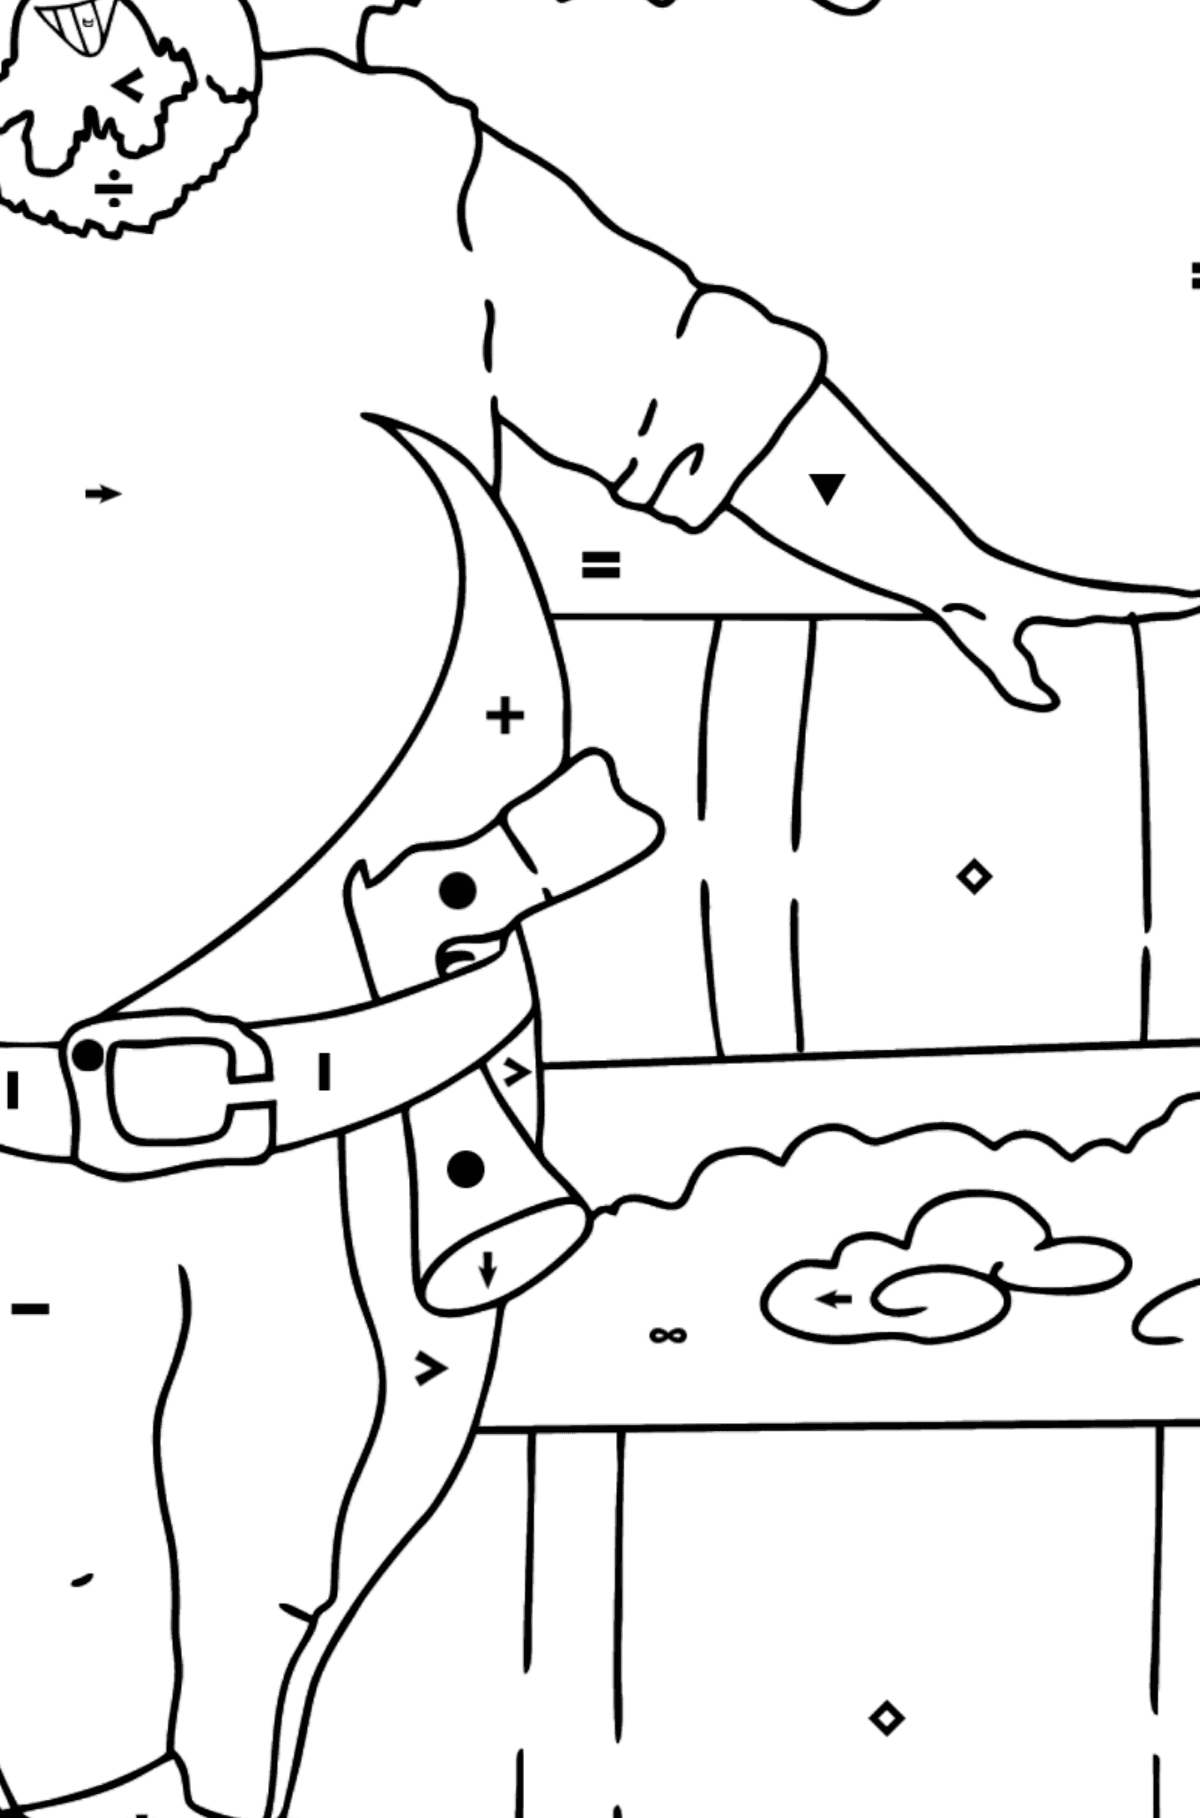 Coloring Page - A Pirate with a Trunk - Coloring by Symbols for Kids